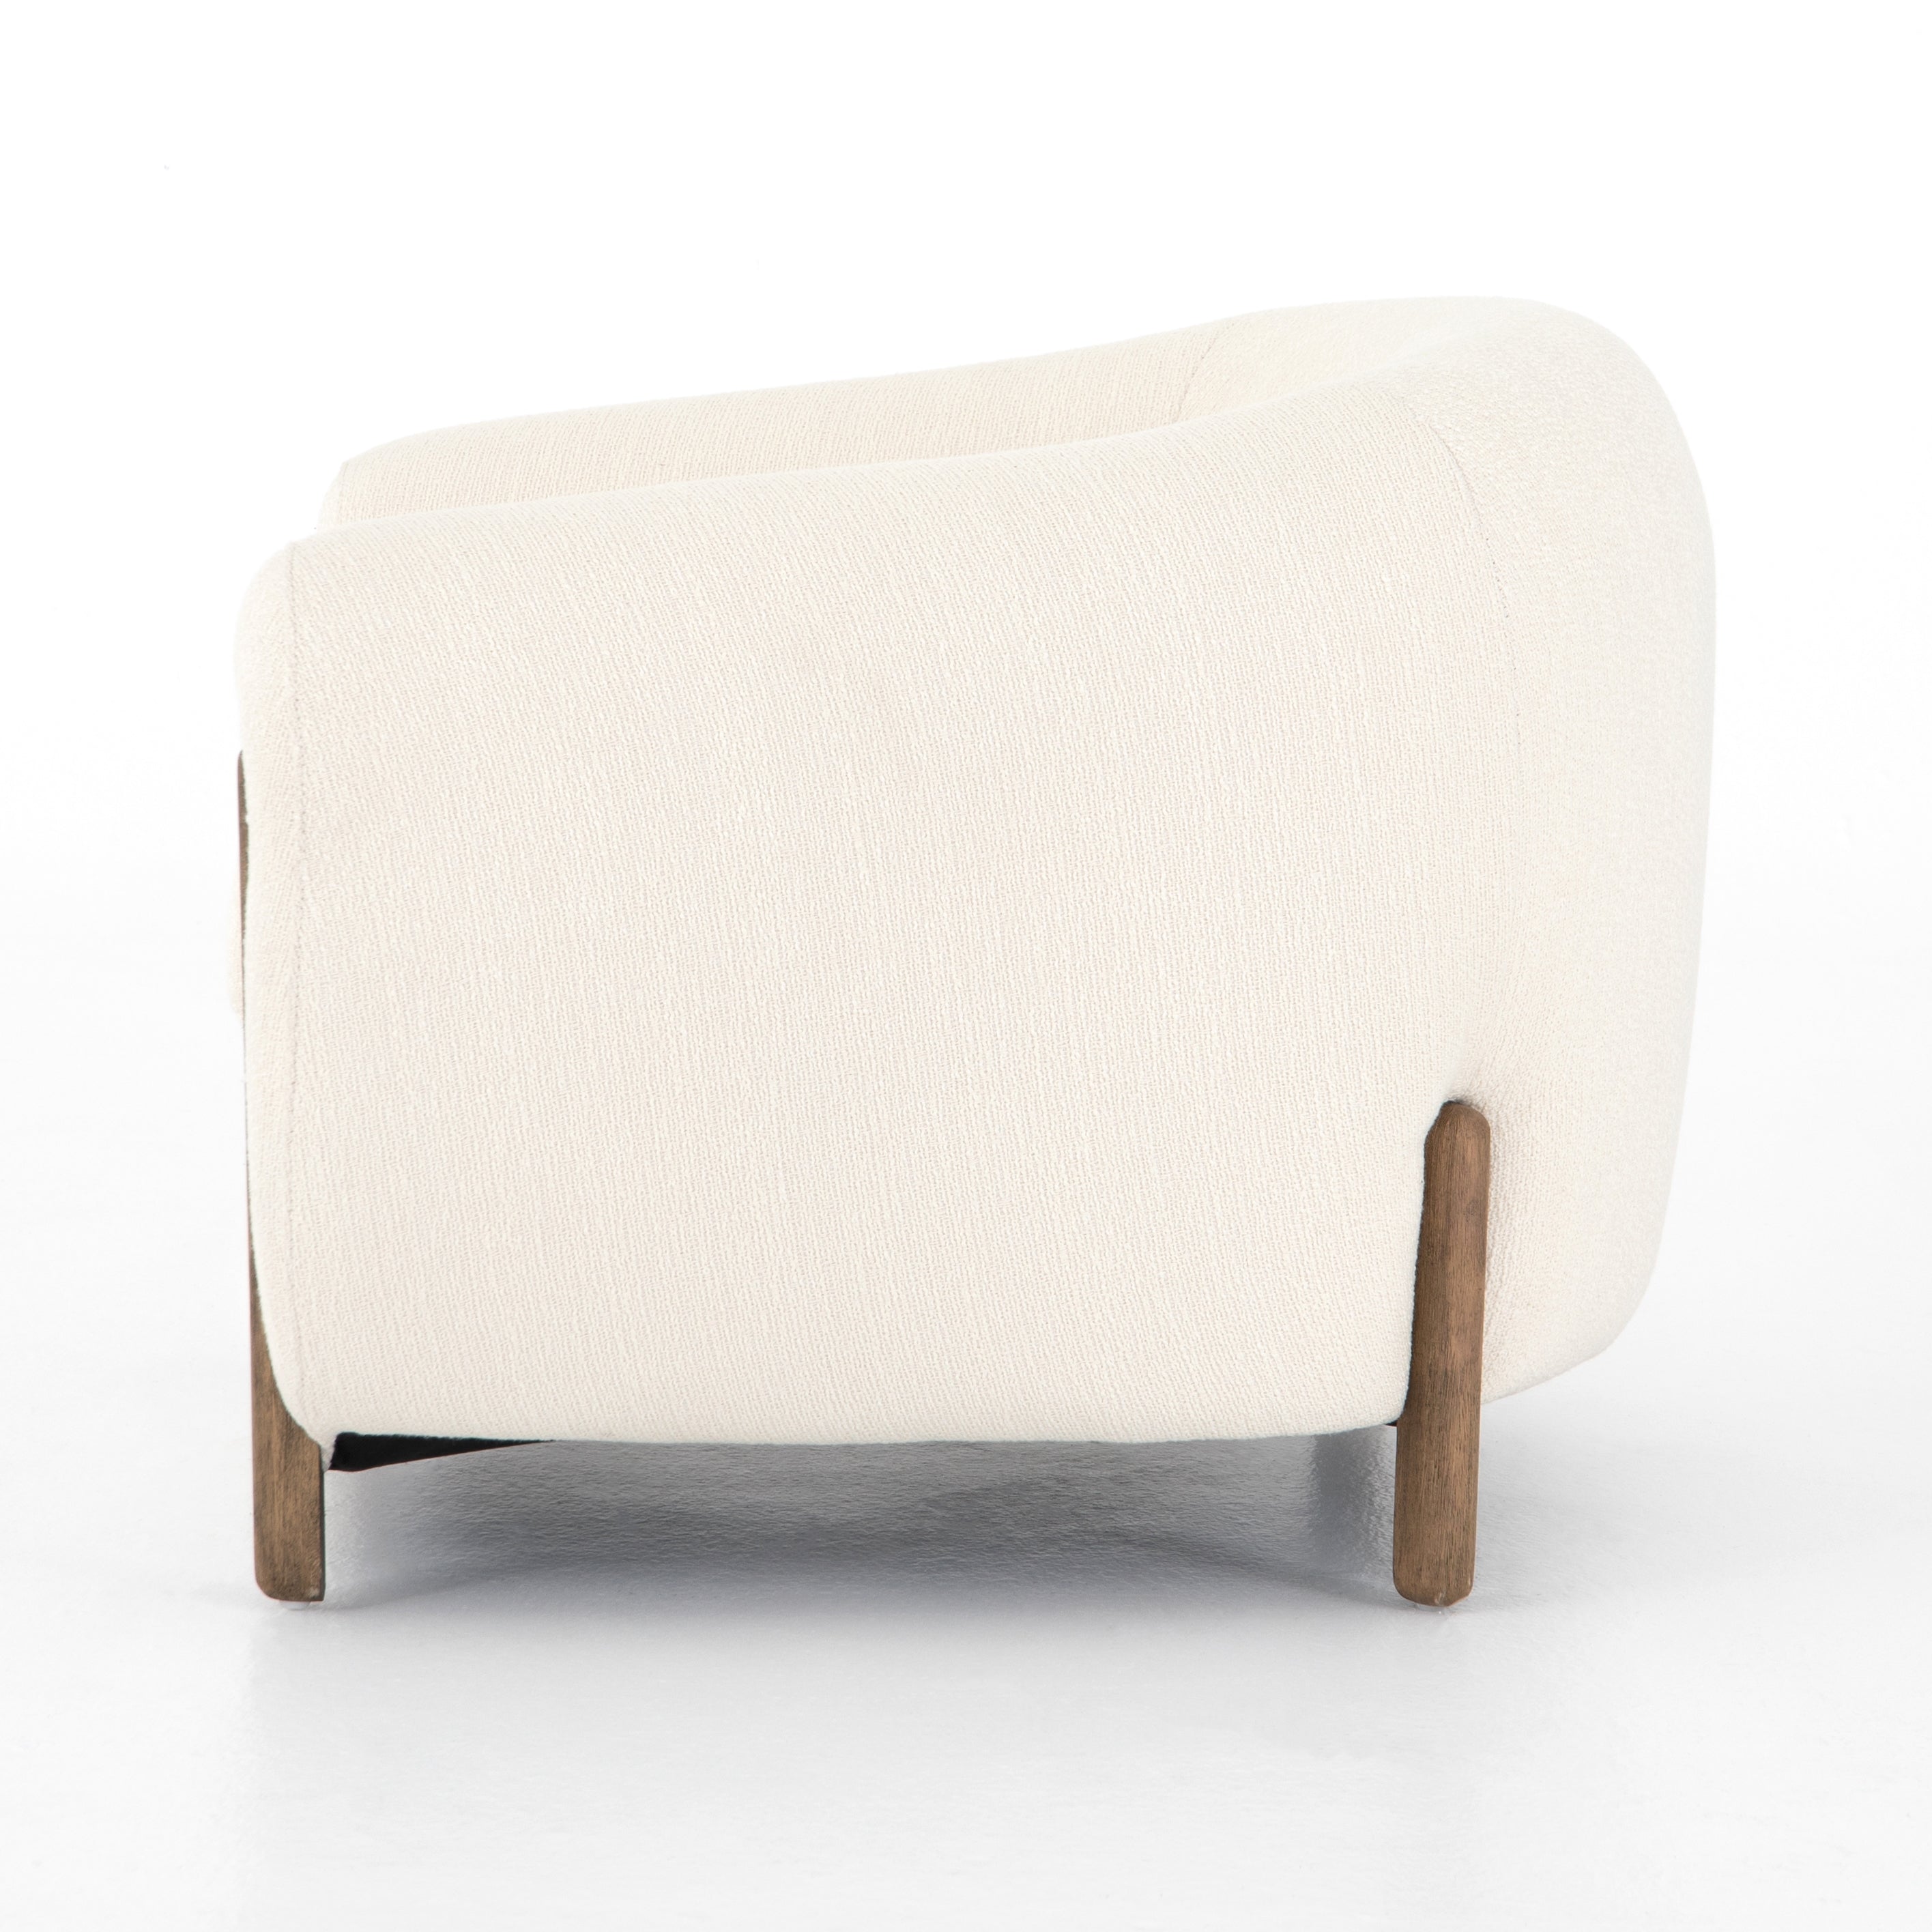 Kerbey Ivory Fabric with Distressed Natural Parawood | Lyla Chair | Valley Ridge Furniture